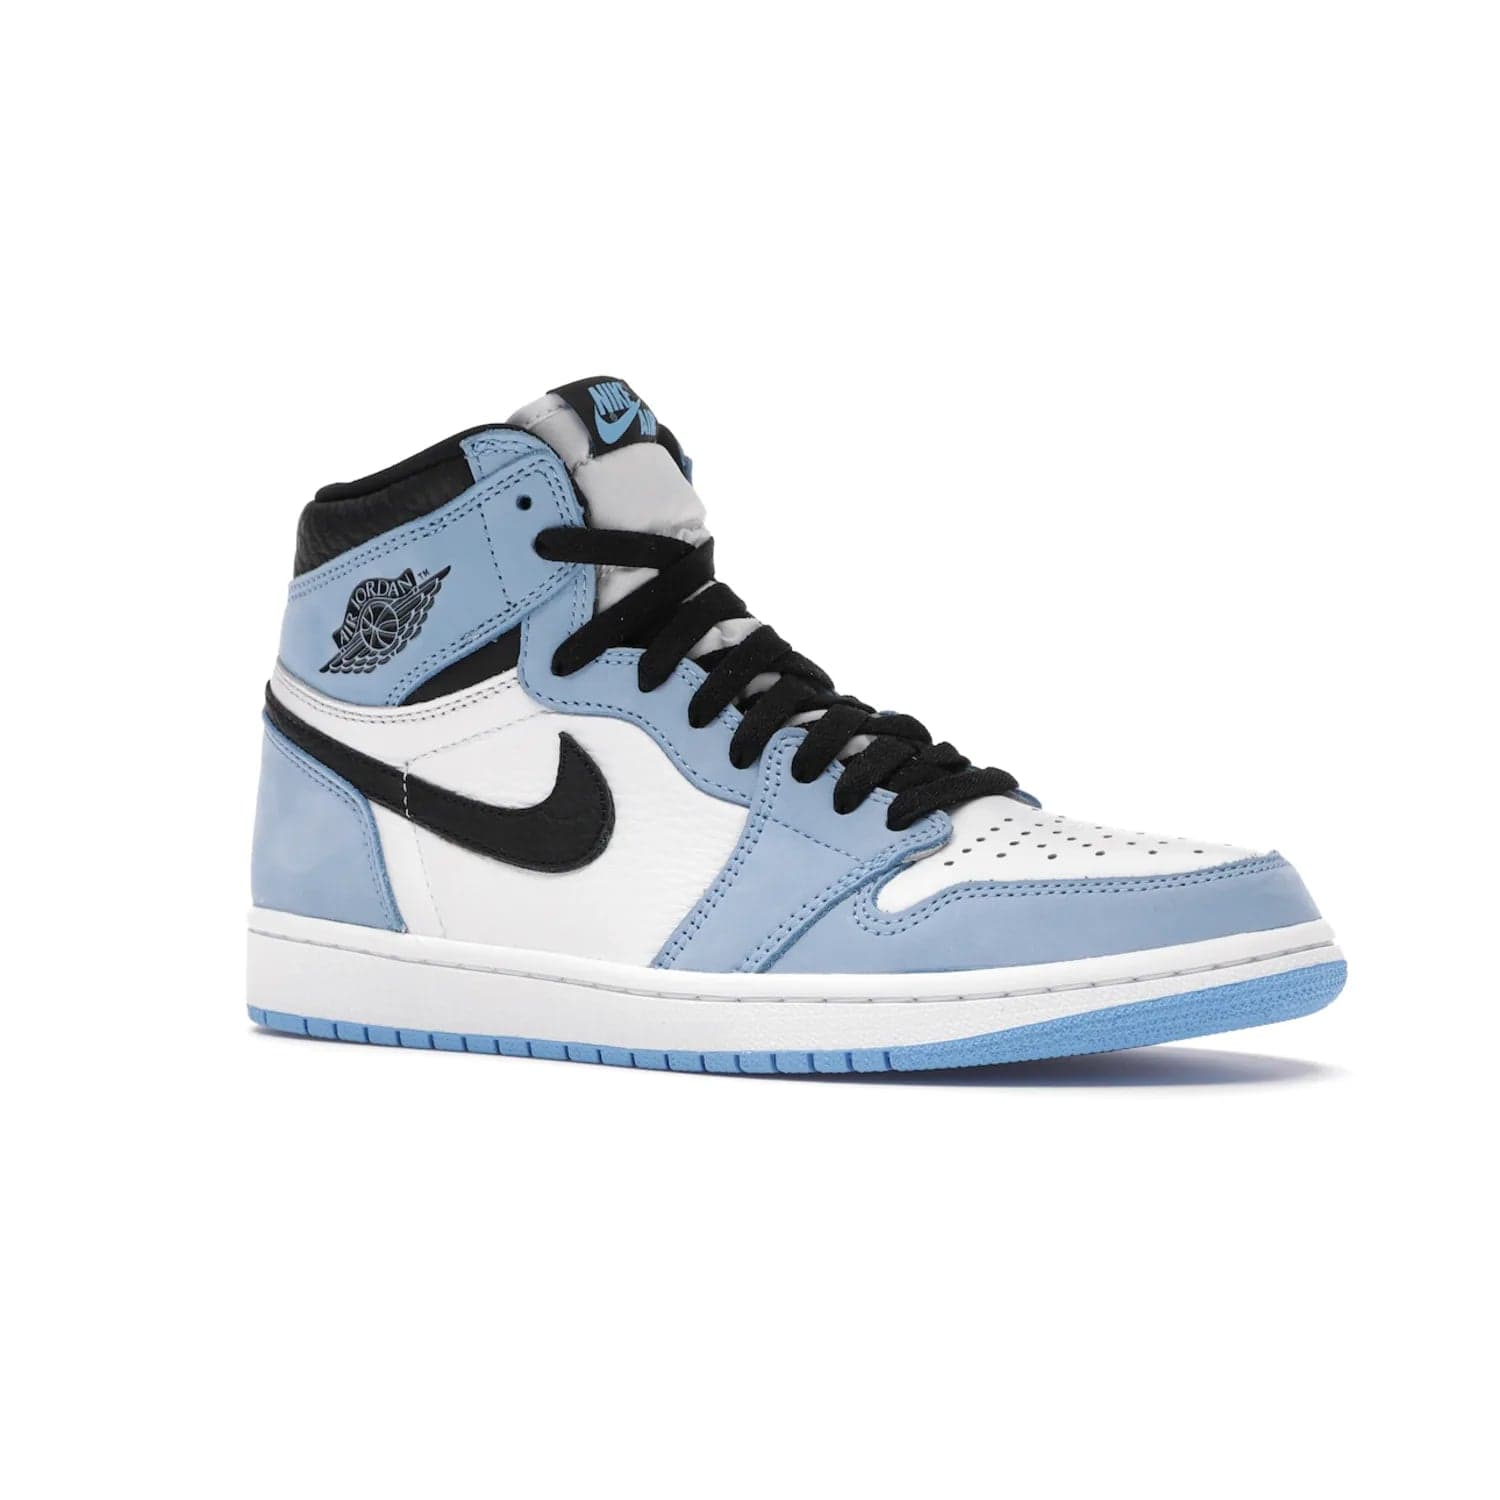 Jordan 1 Retro High White University Blue Black - Image 4 - Only at www.BallersClubKickz.com - Shop the Air Jordan 1 Retro High University Blue. White and black tumbled leather upper with University Blue Durabuck overlays, Nike Air woven label, Air Jordan Wings Logo, white midsole and University Blue outsole. Available March 2021.